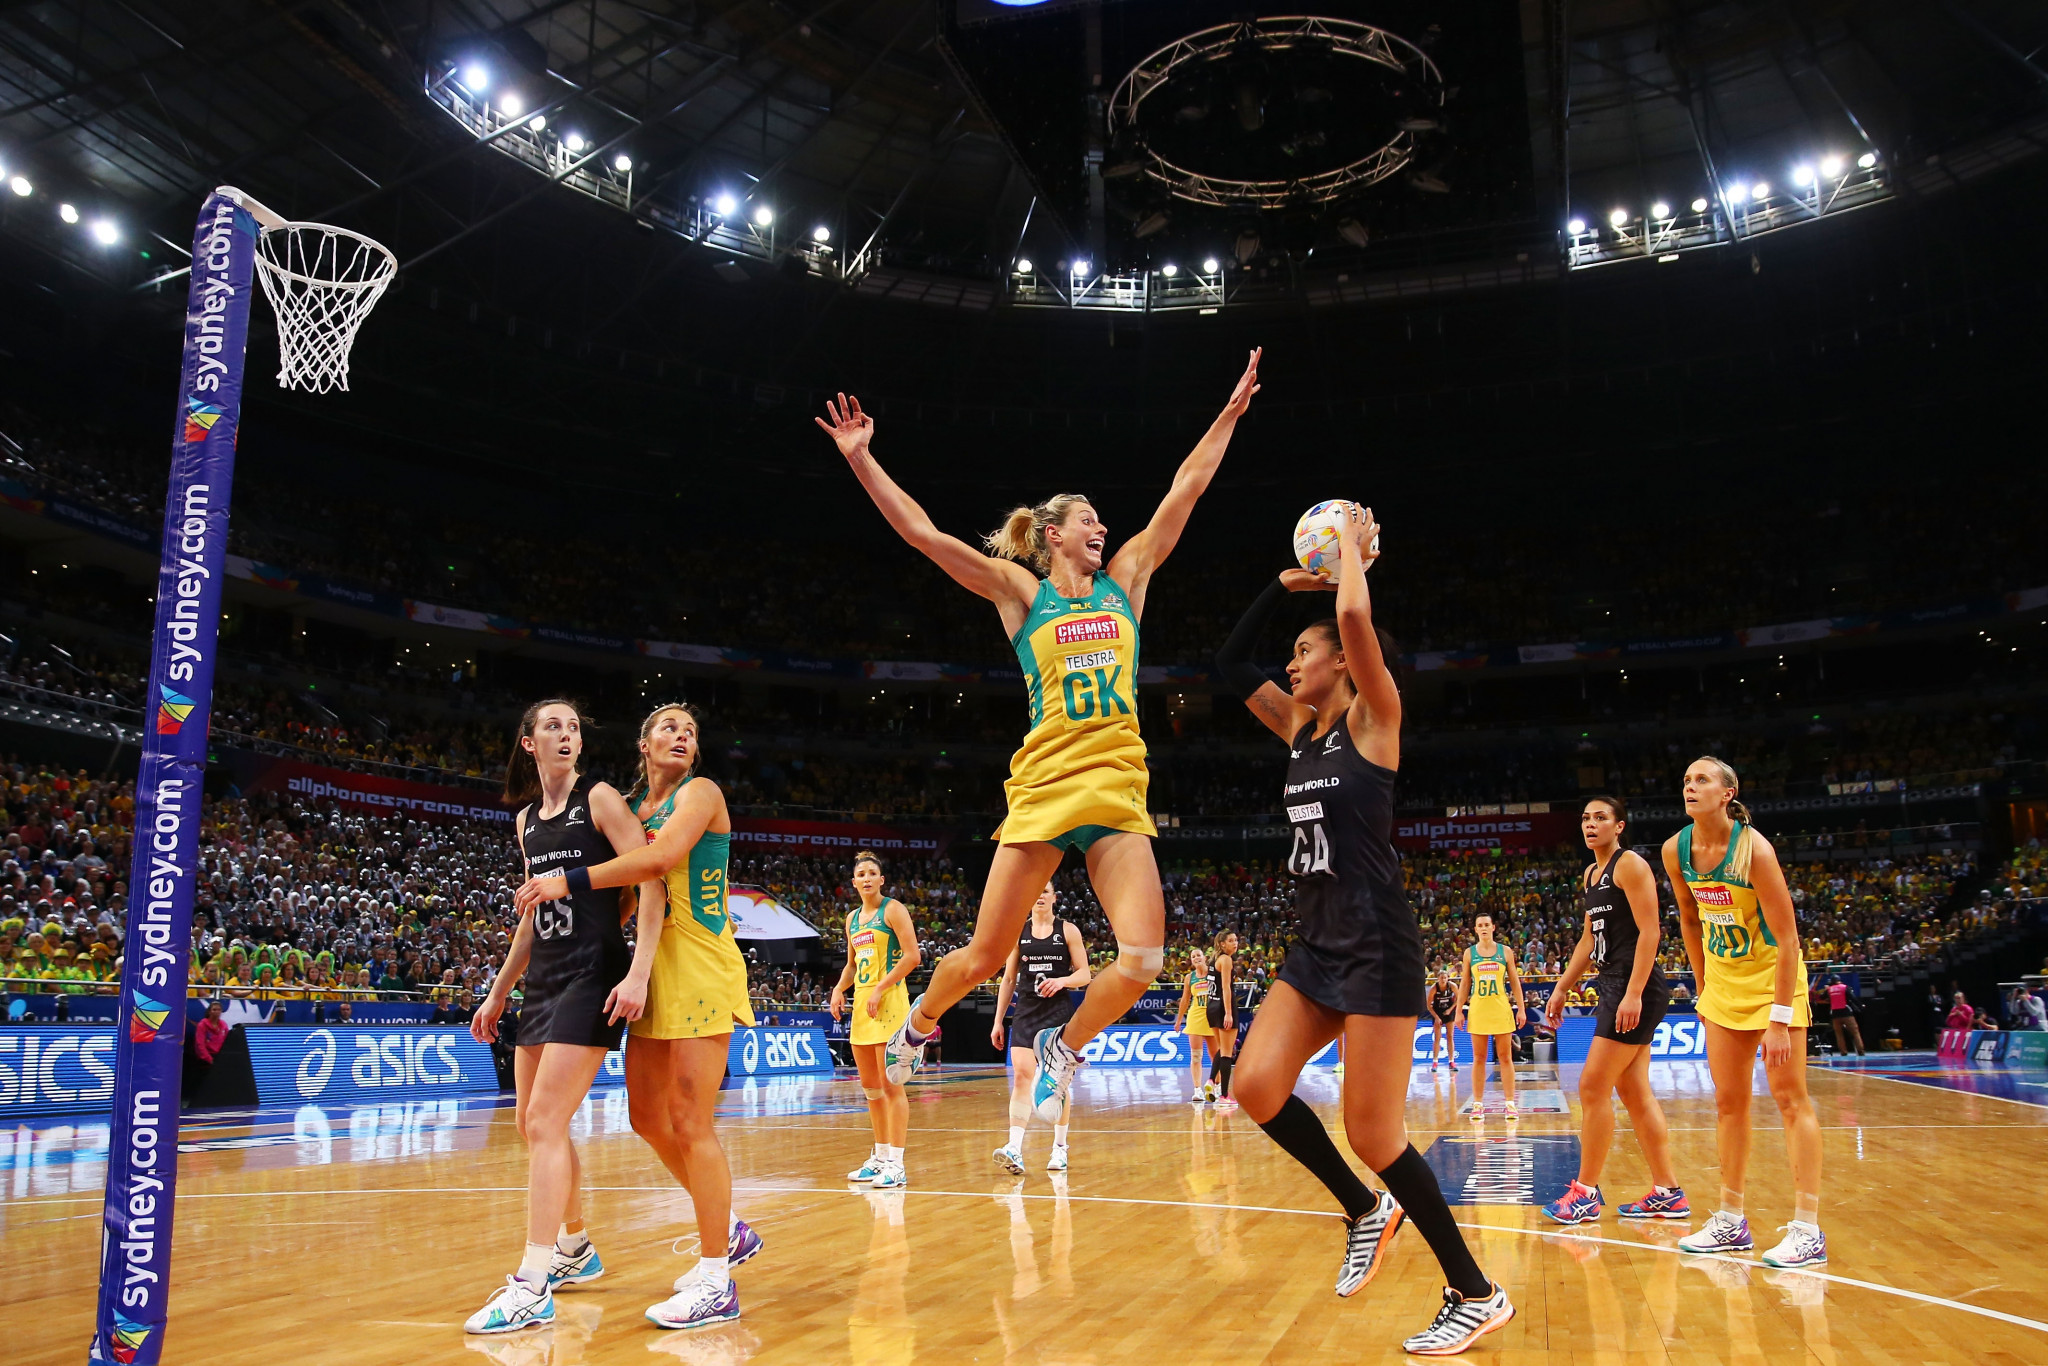 Australia beat New Zealand in the final when Sydney last held the Netball World Cup in 2015 ©Getty Images